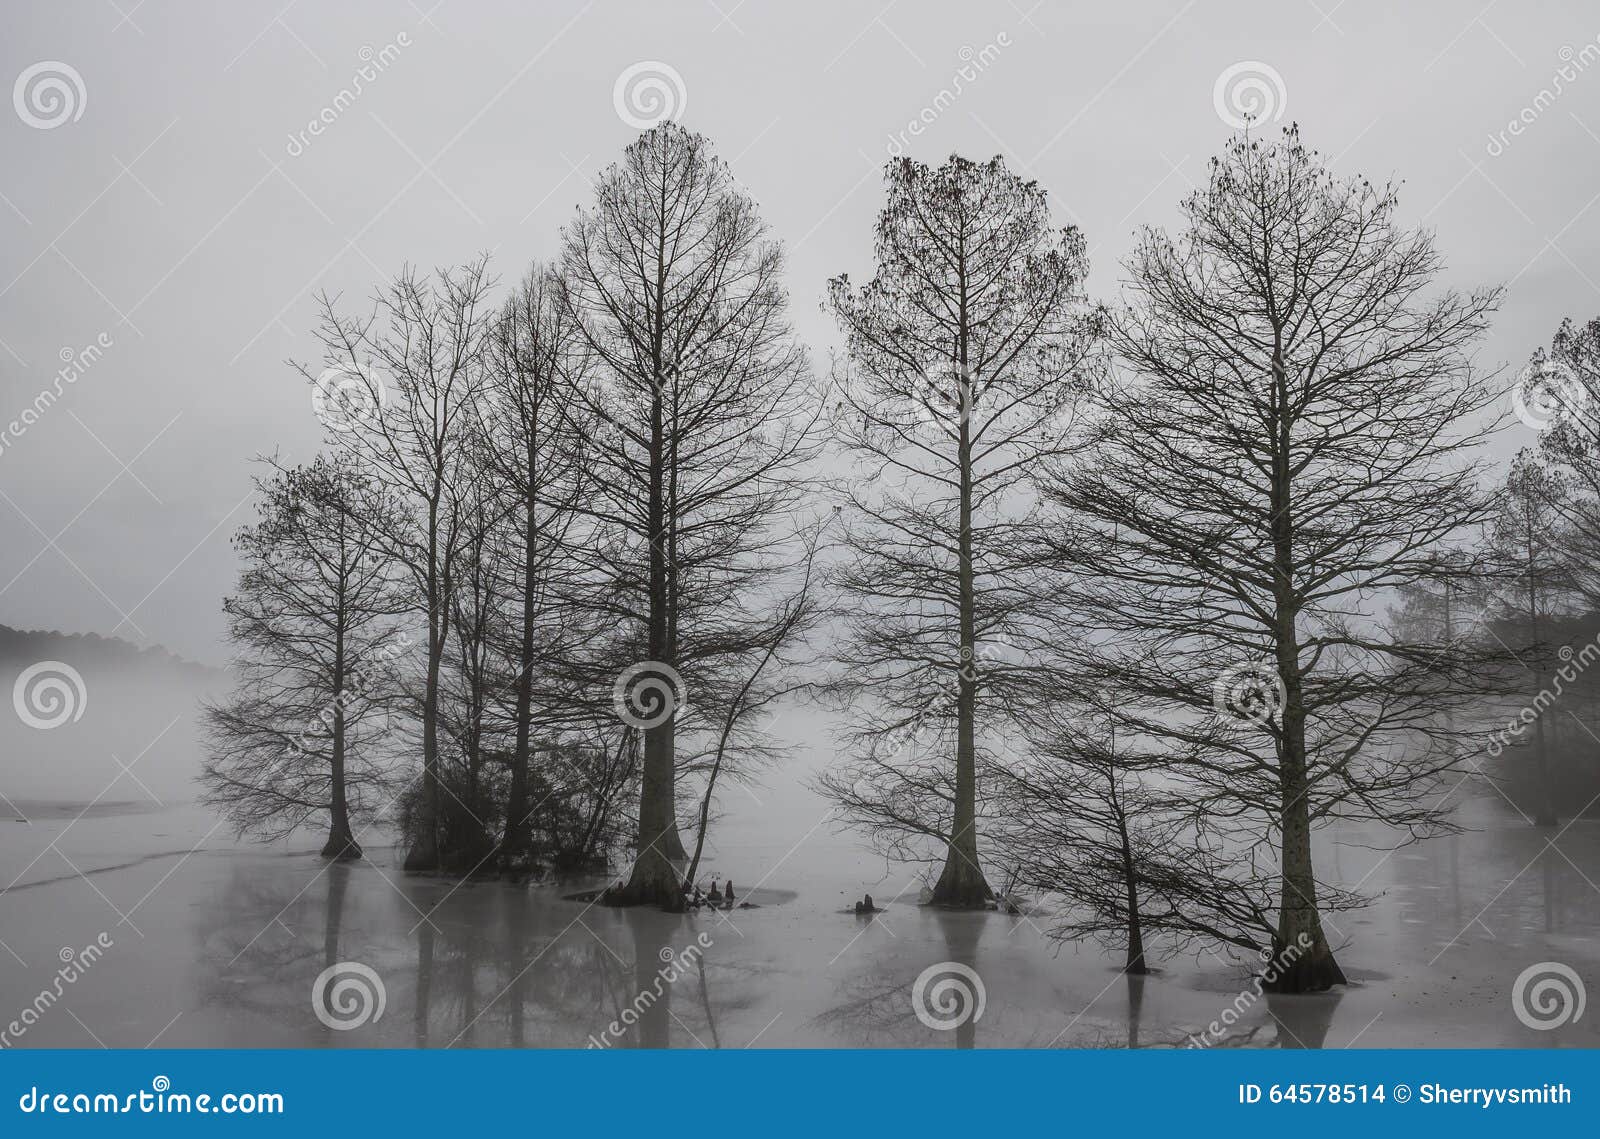 cypress trees frozen in ice and shrouded in fog